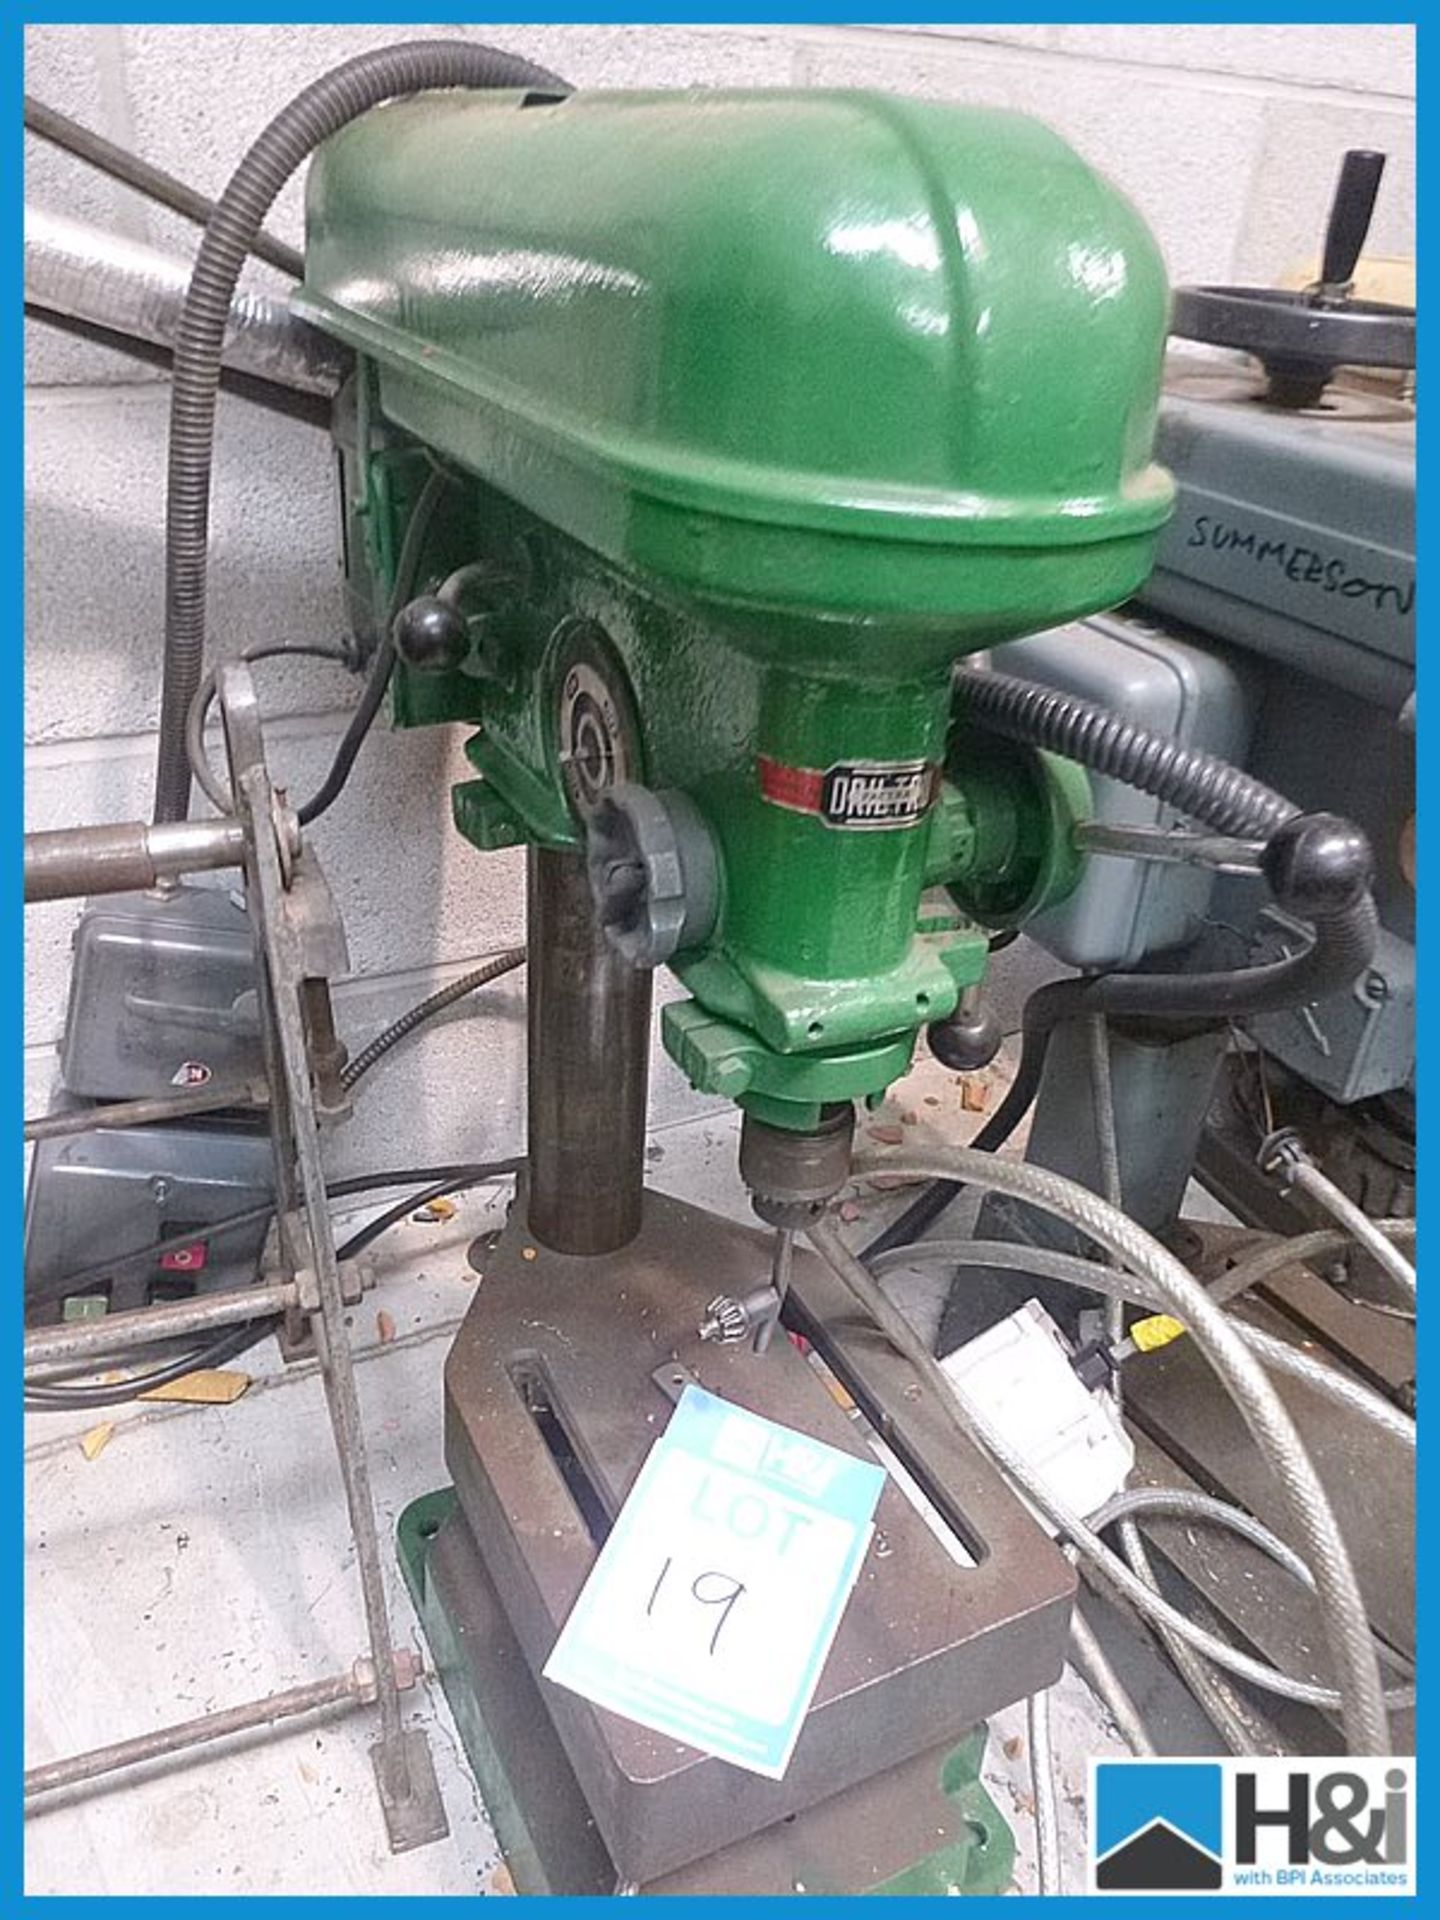 3 phase dril tru pacera drill press Appraisal: Viewing Essential Serial No: NA Location: Alpha